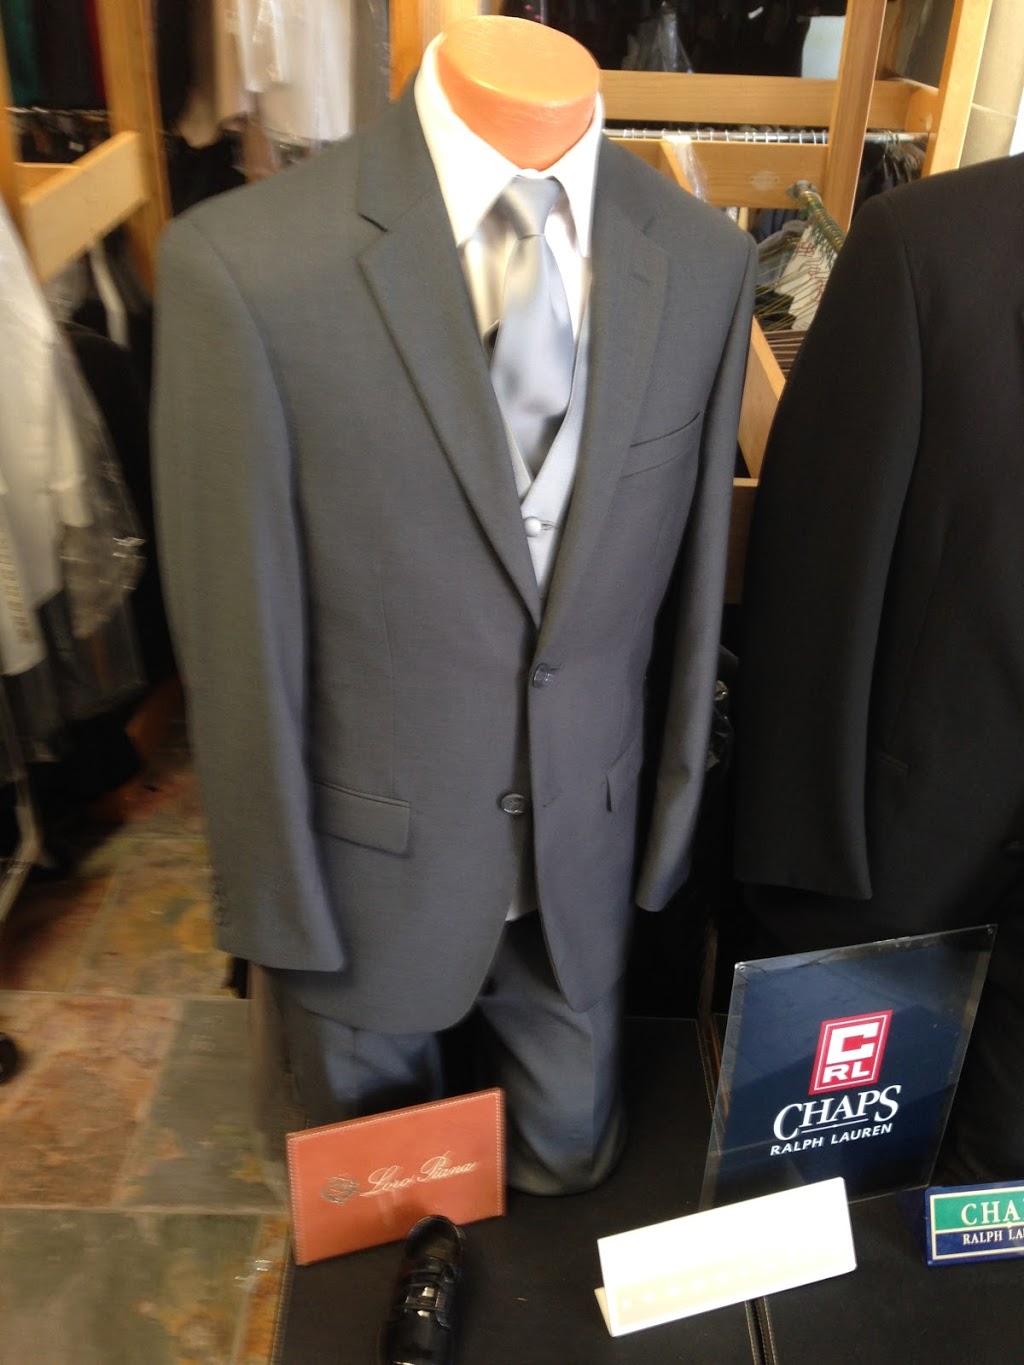 Tuxedo Outlet | 5046 Trail Lake Dr, Fort Worth, TX 76133 | Phone: (817) 263-5525